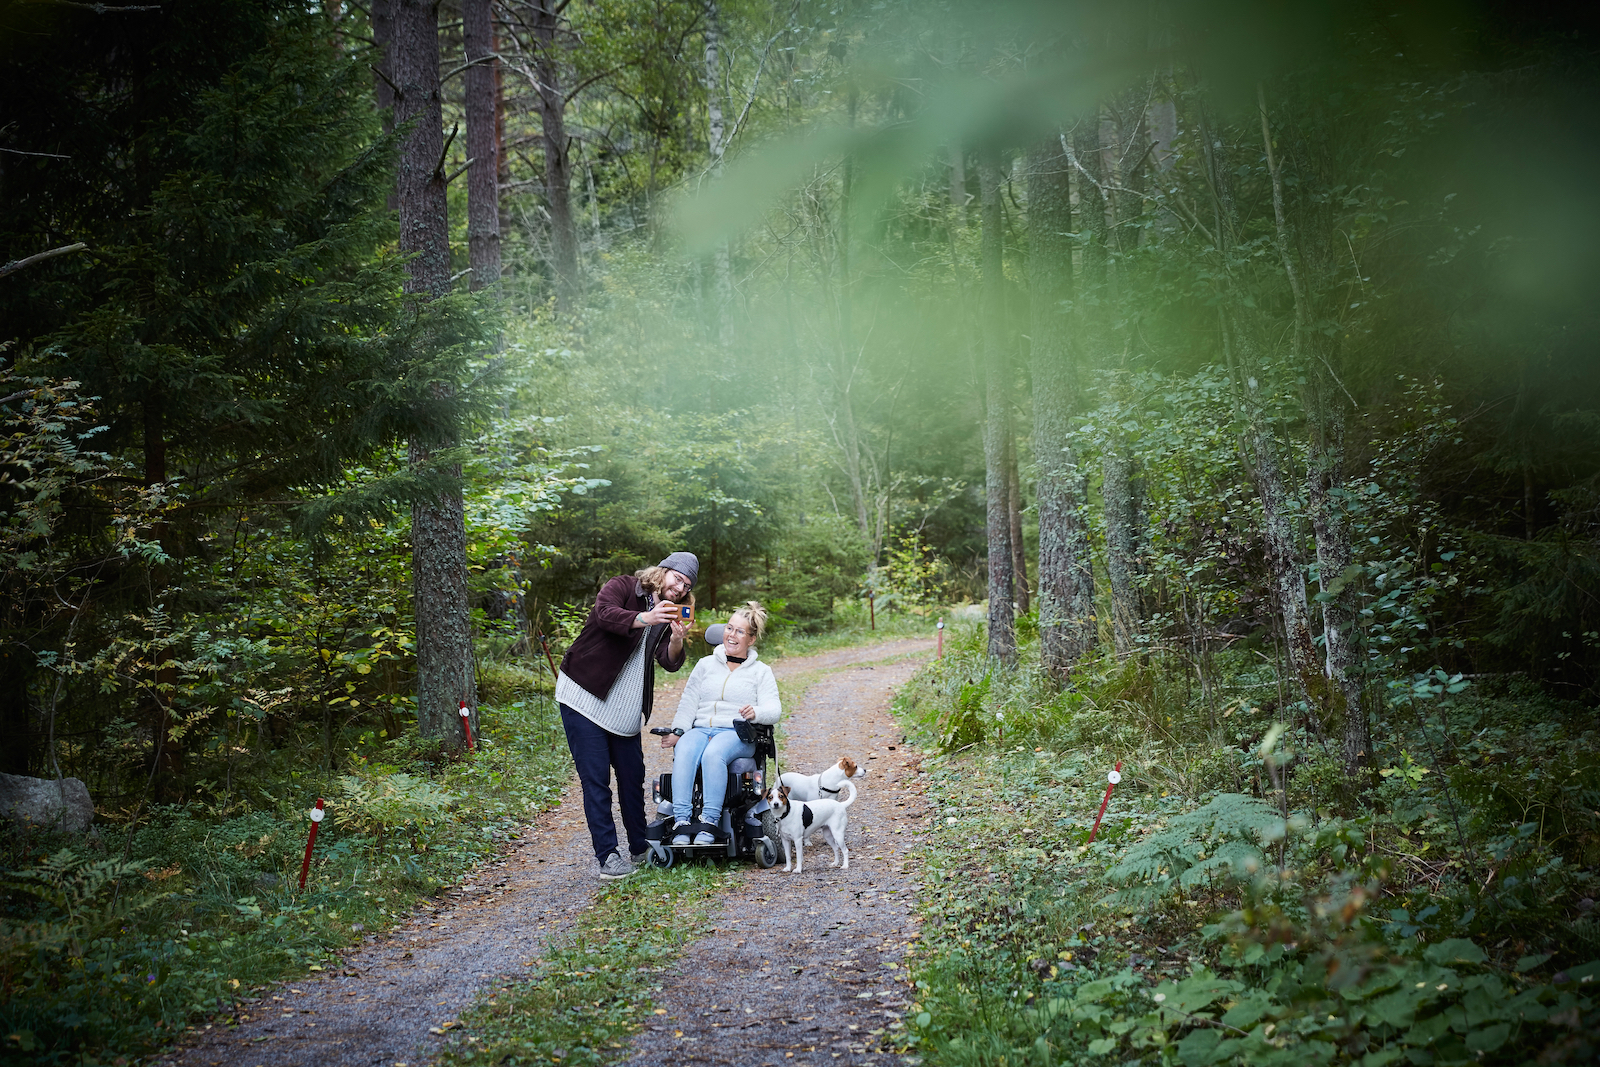 Wheelchair and stroller accessible hike